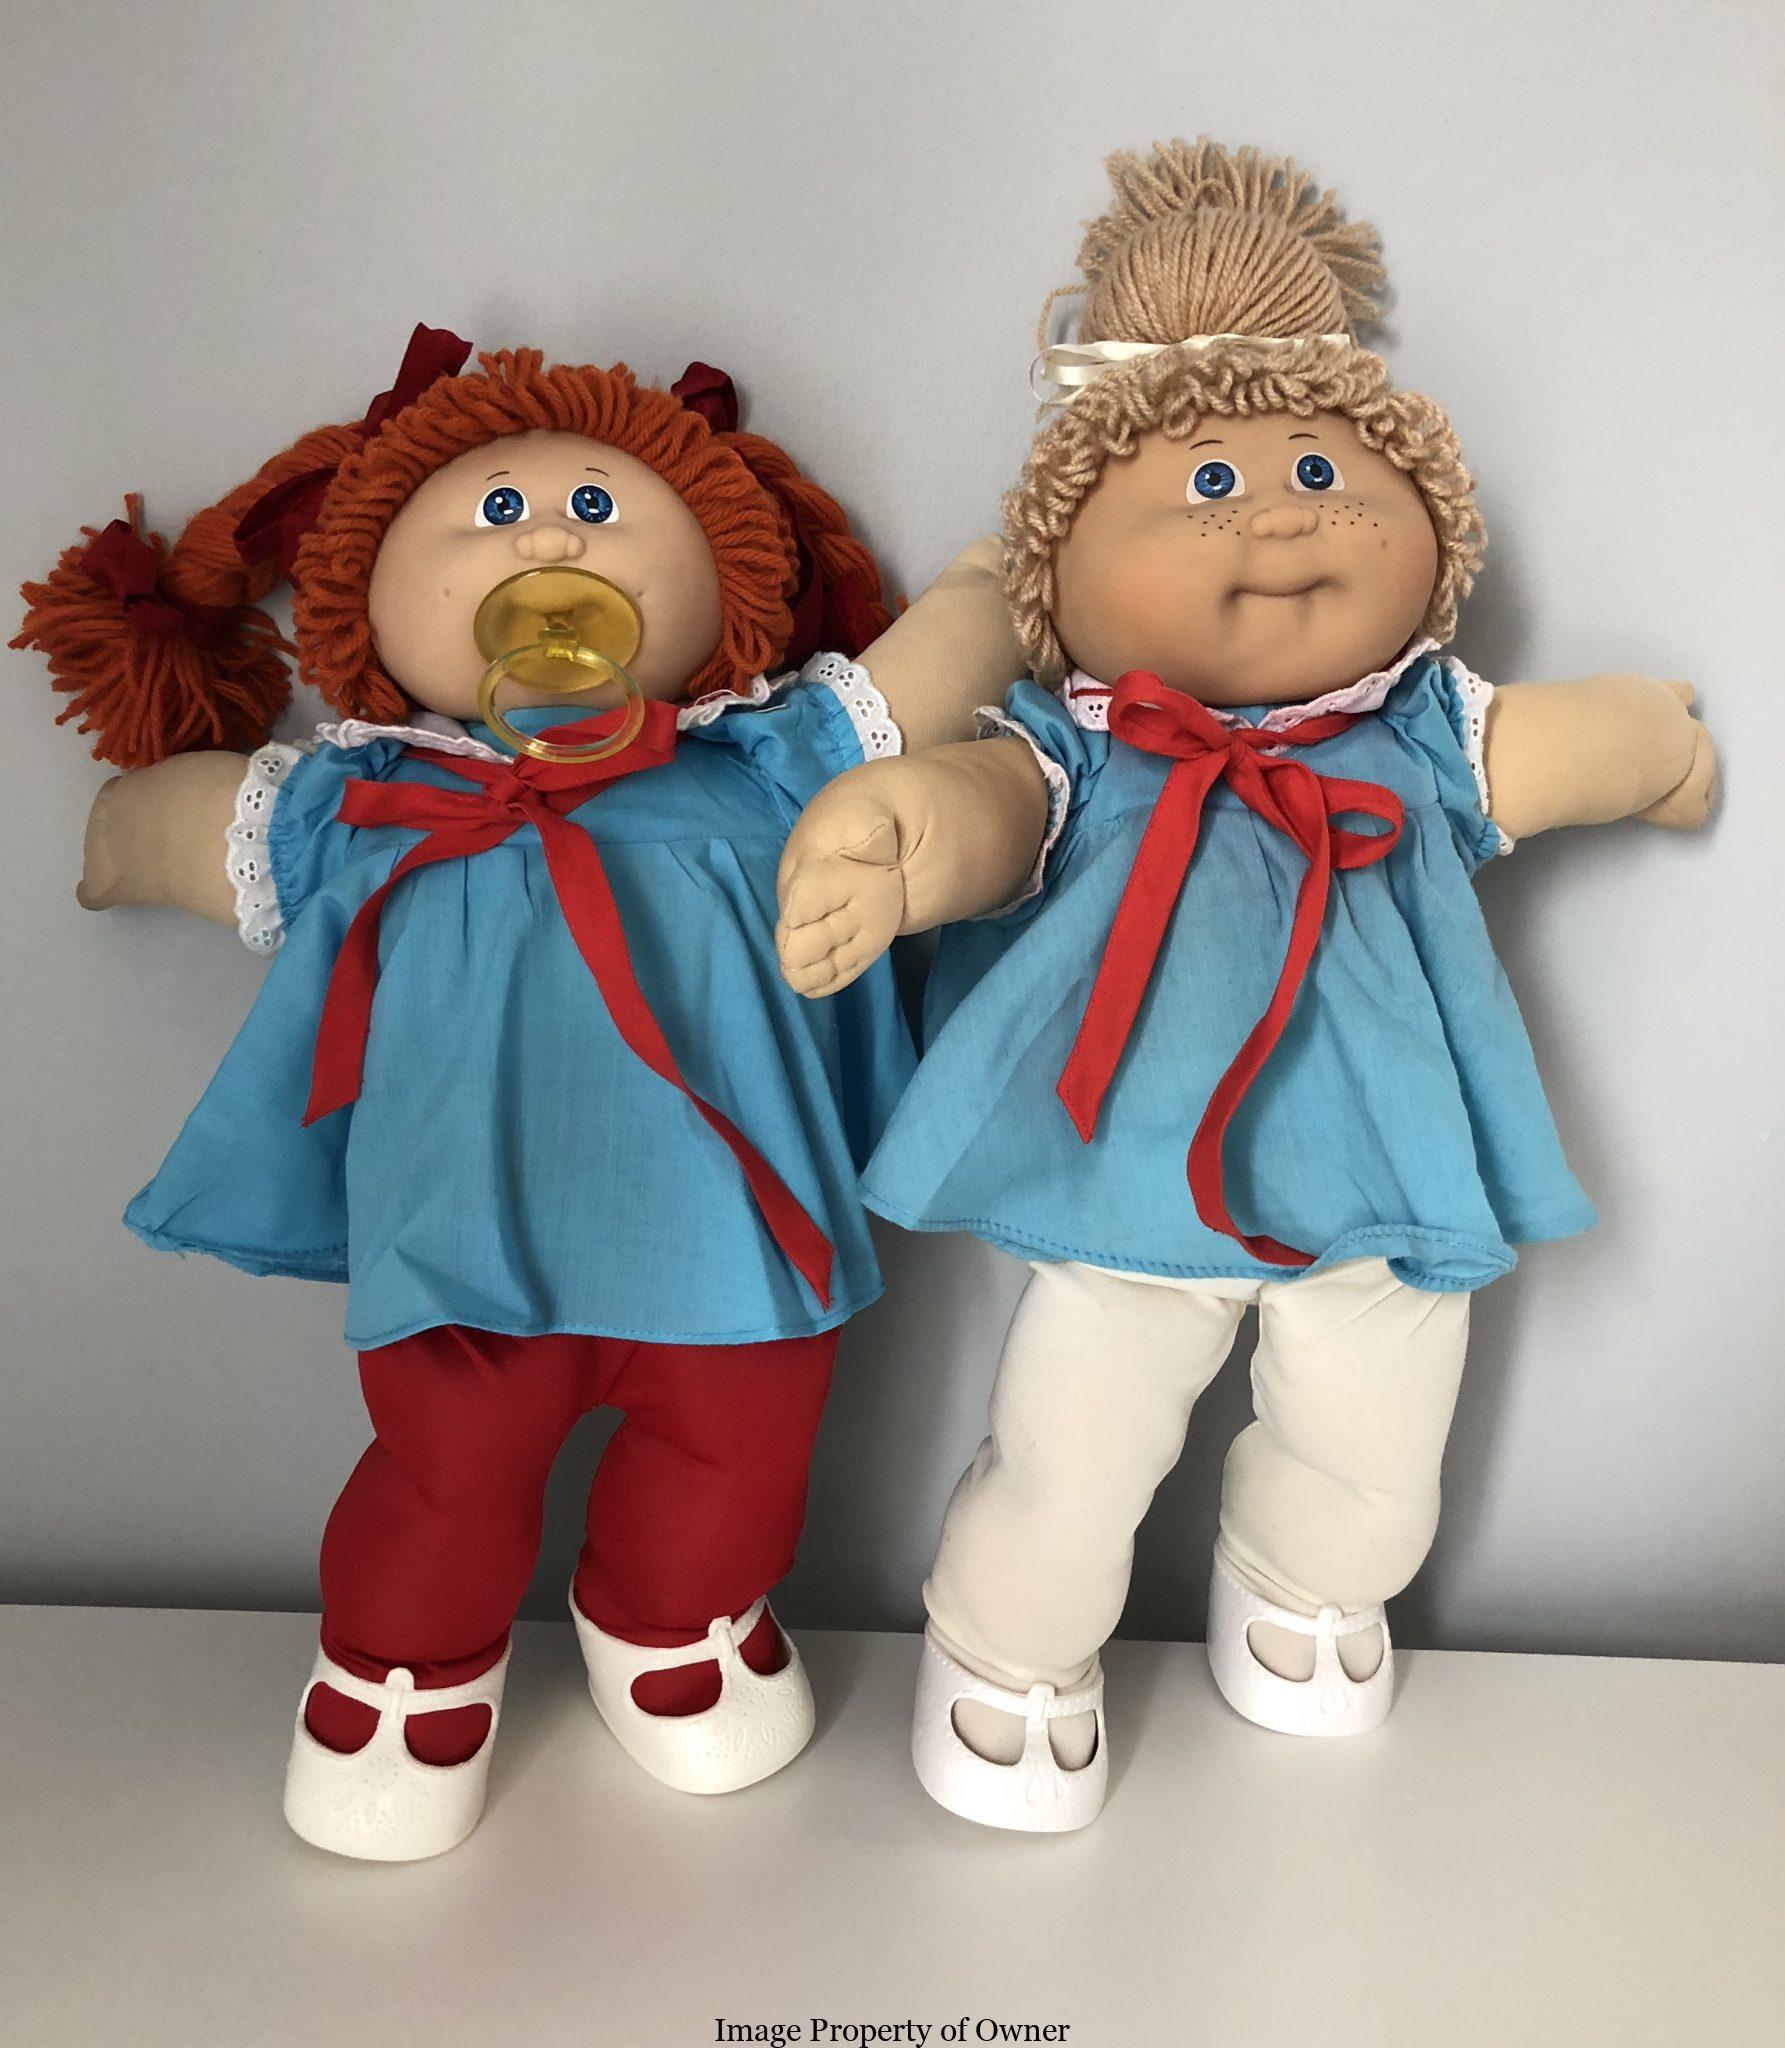 mattel first edition cabbage patch doll 1988